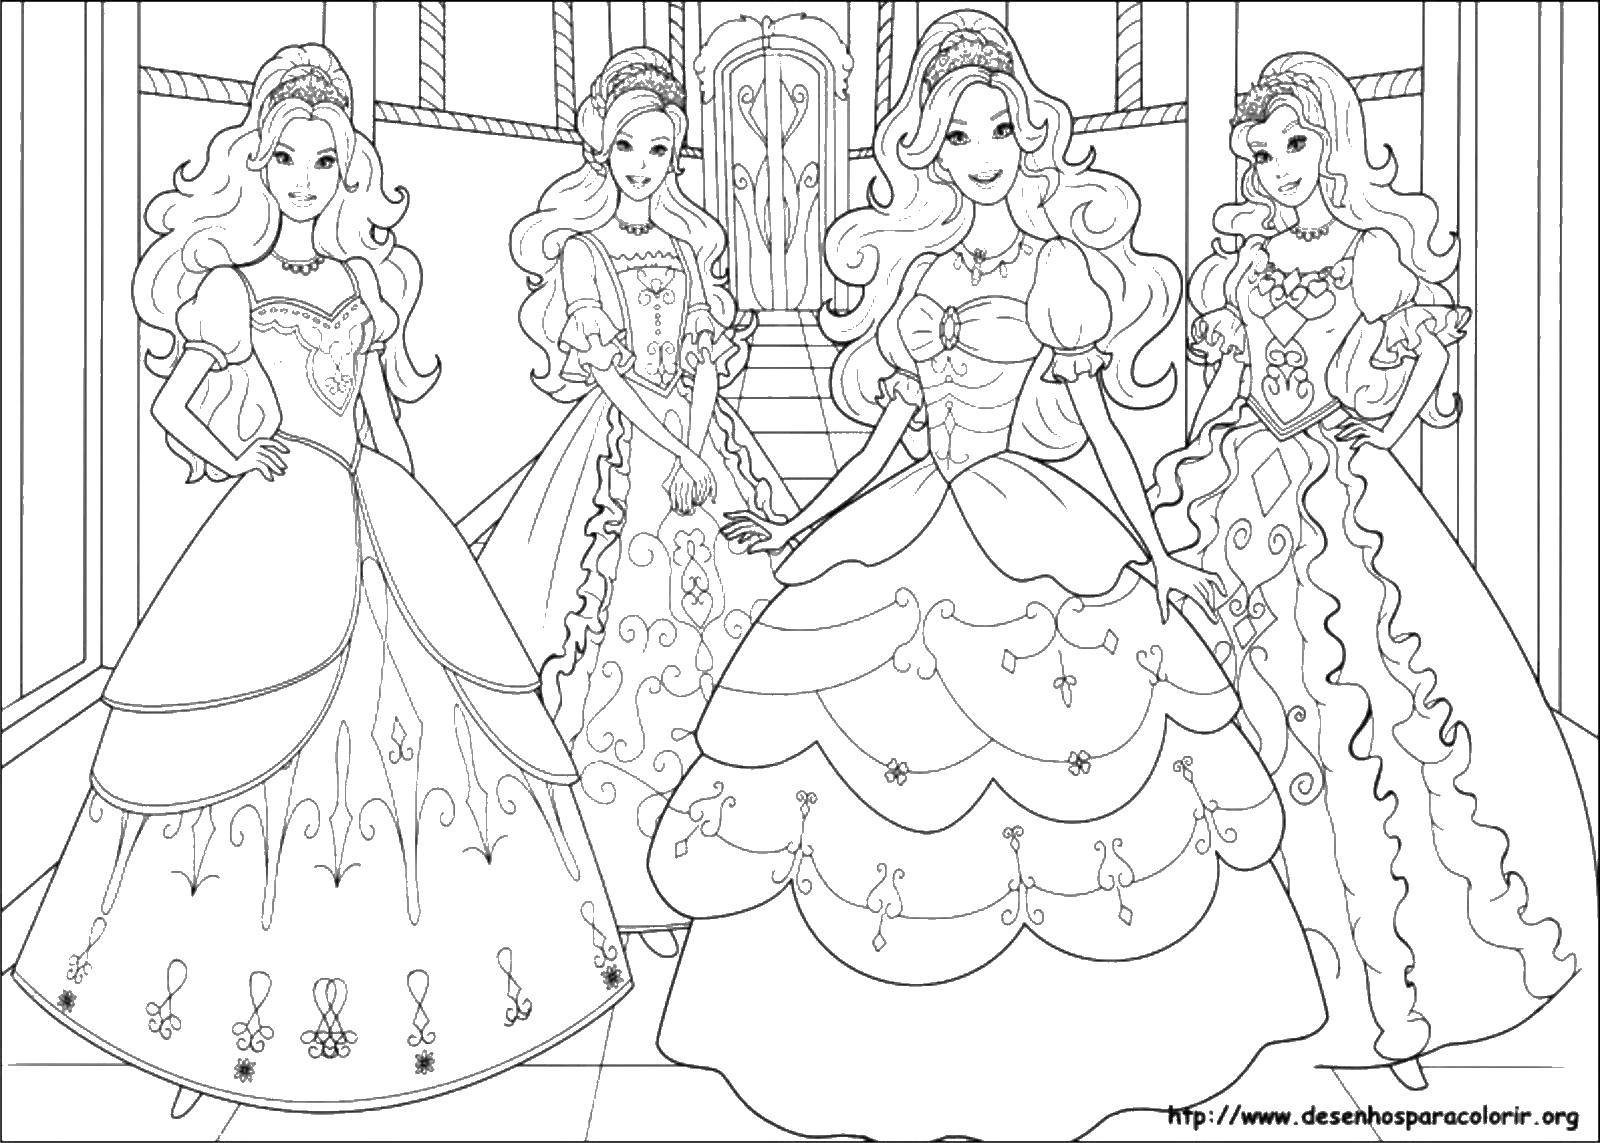 Coloring Barbie at the ball. Category Barbie . Tags:  Barbie , dress, crown, ball.